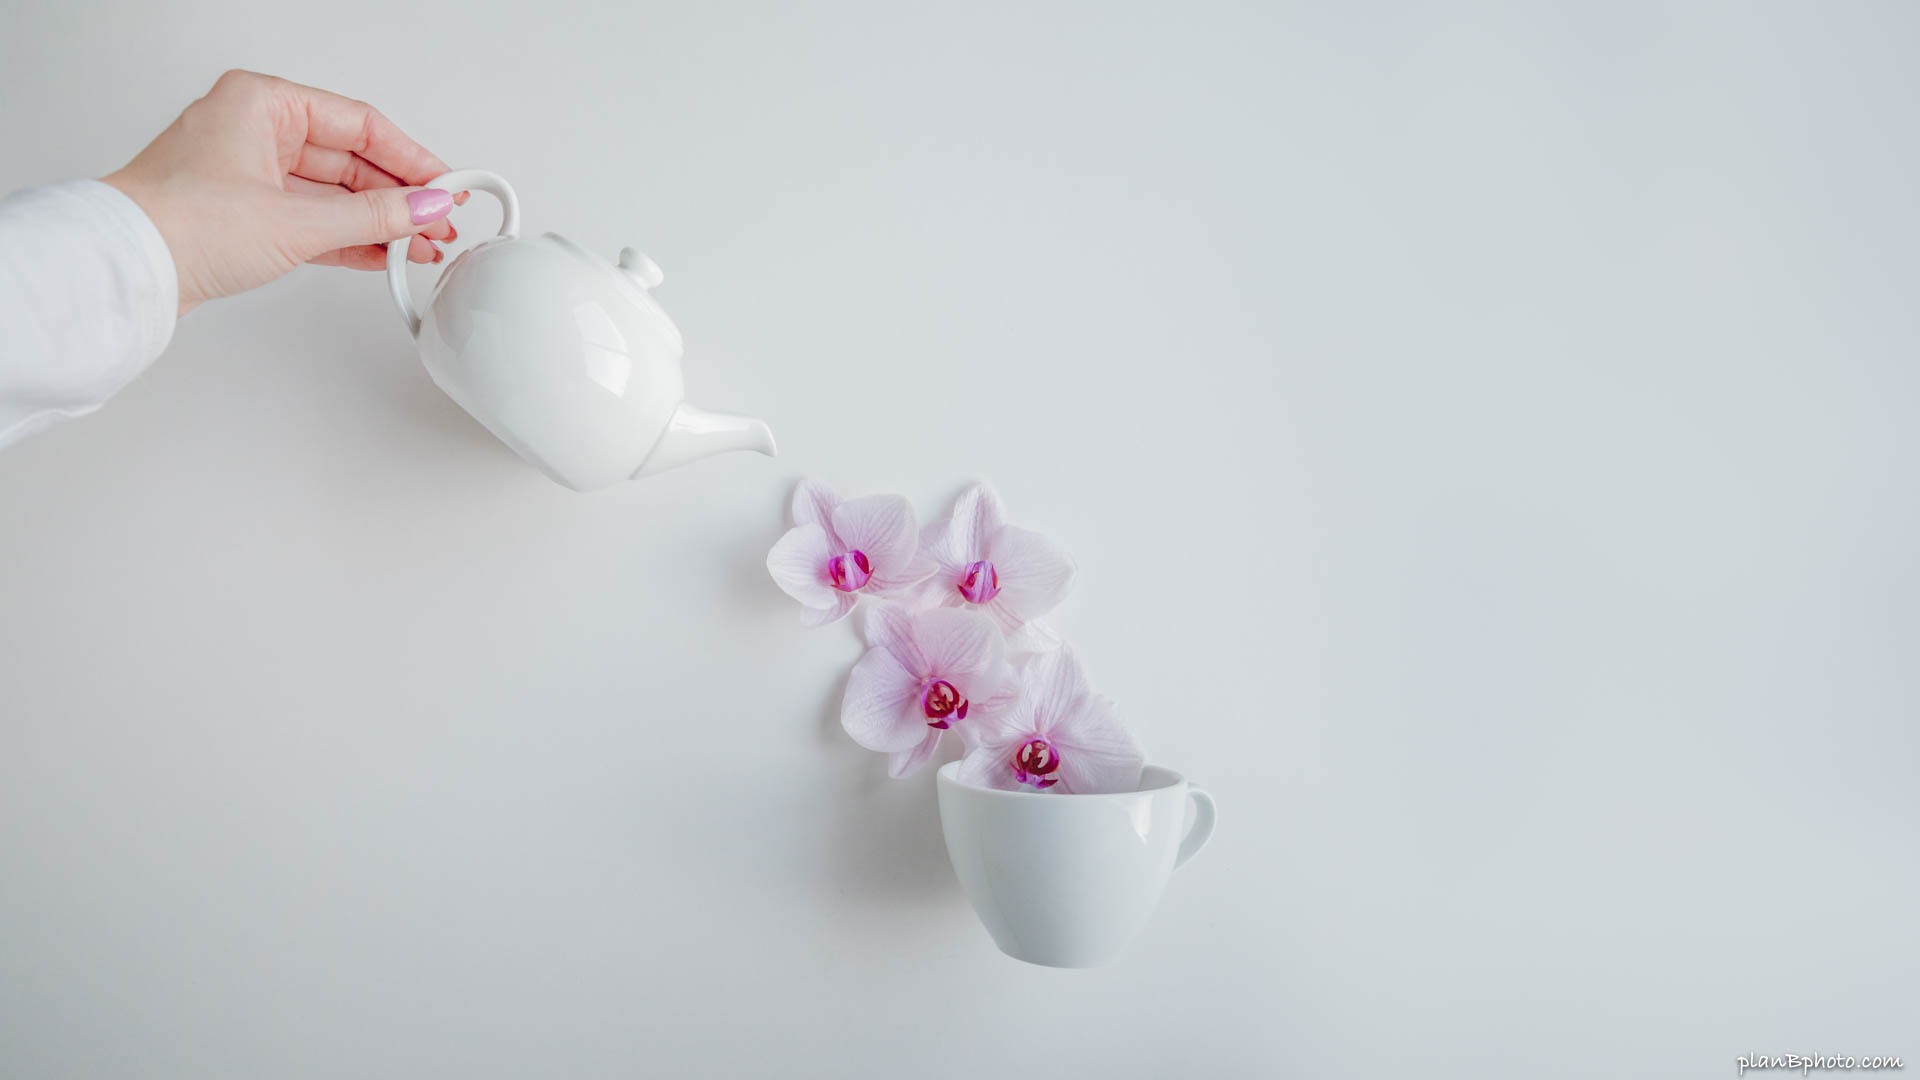 Pouring orchids in a cup